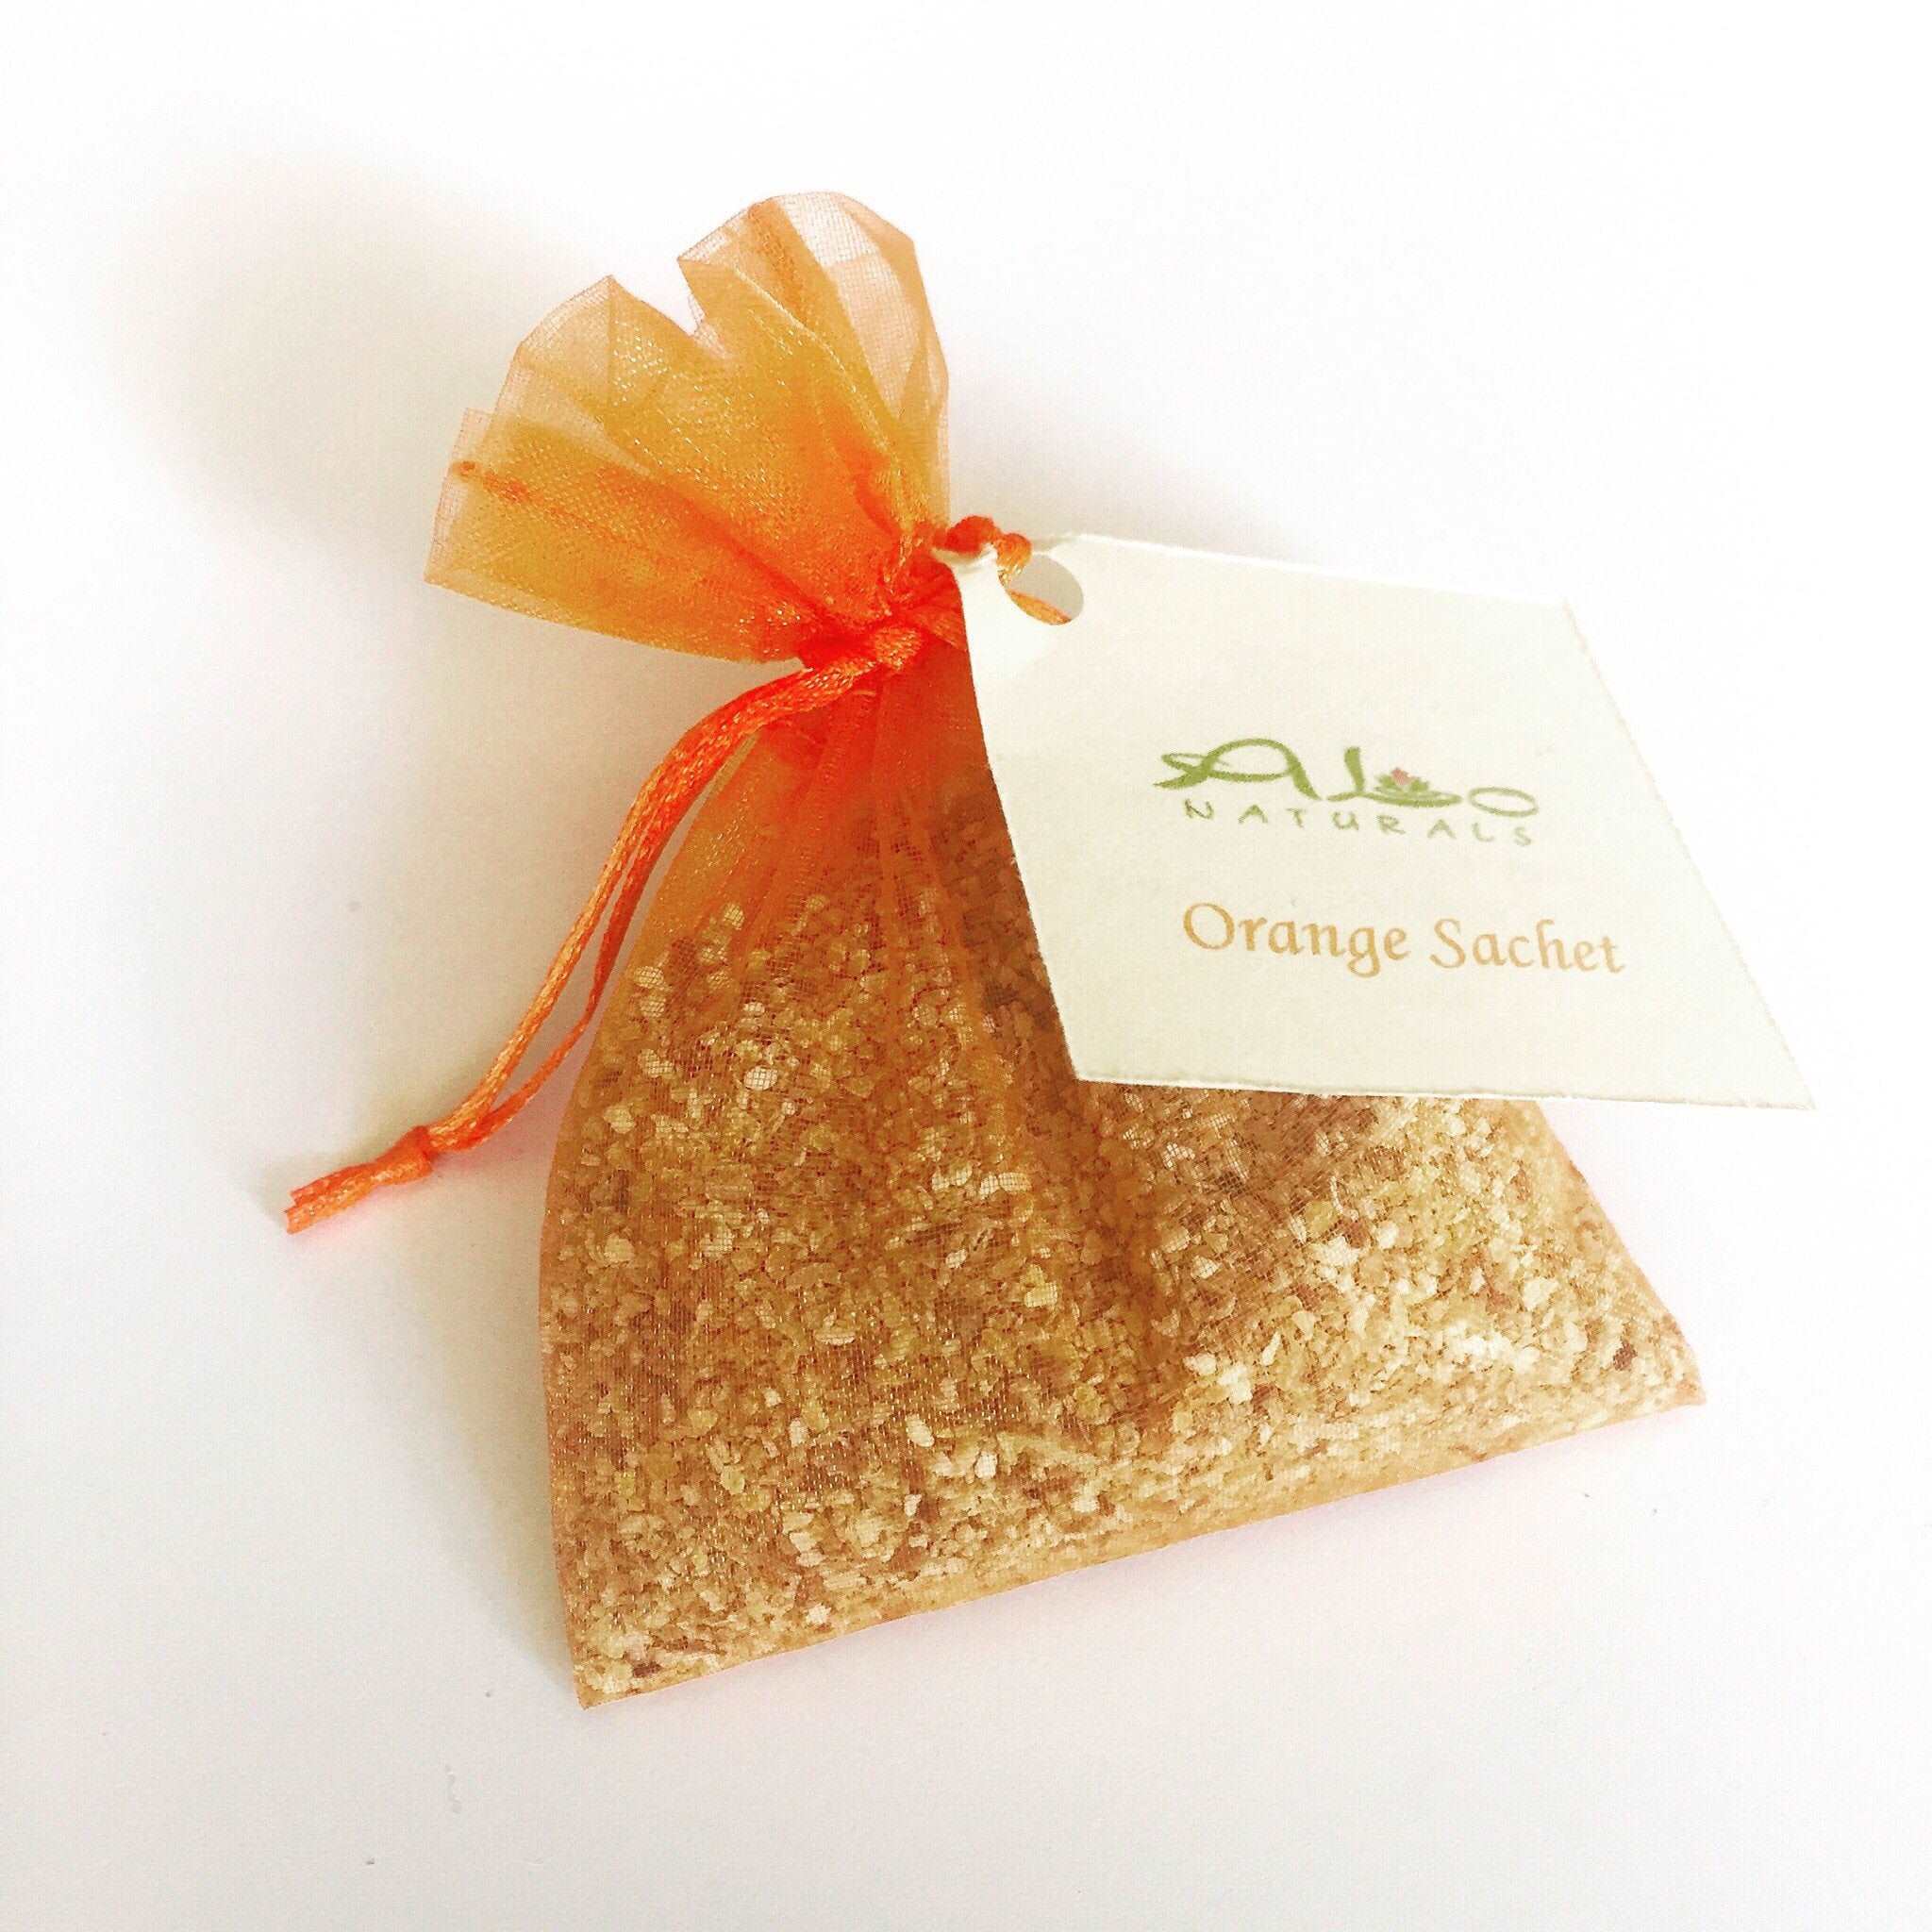 These fresh Orange sachets are handmade by us with all natural botanicals.  Place in a drawer, closet, car, suitcase, purse, or anywhere you desire a fresh, pure, and natural scent!